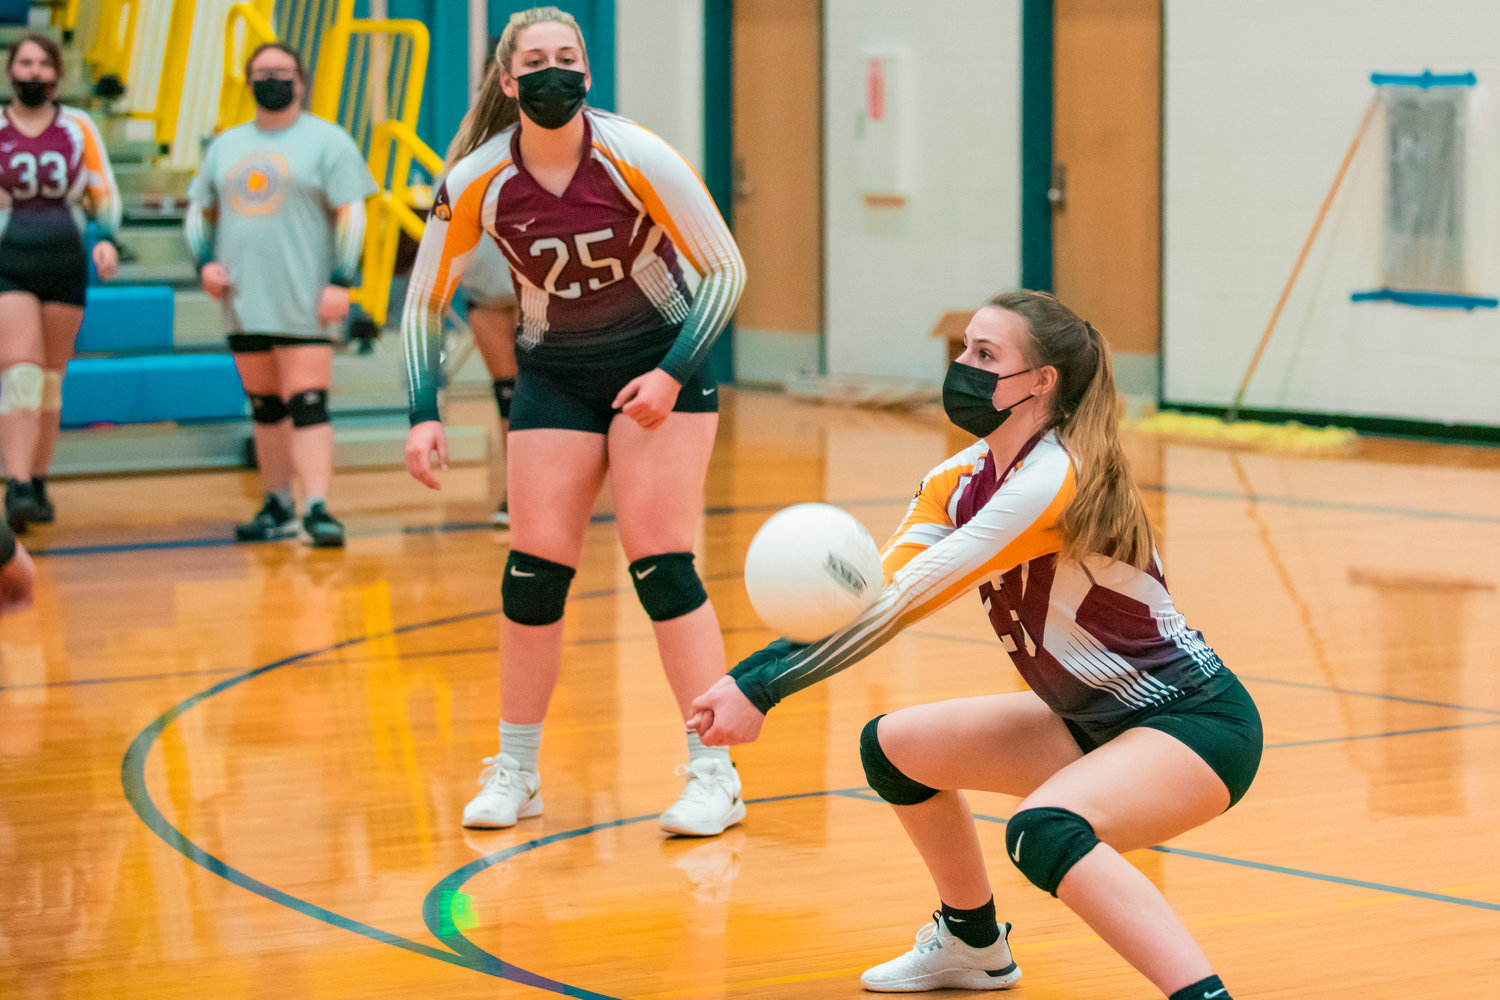 Winlock’s Karli Jones (23)  makes contact during a game against Adna on Wednesday.